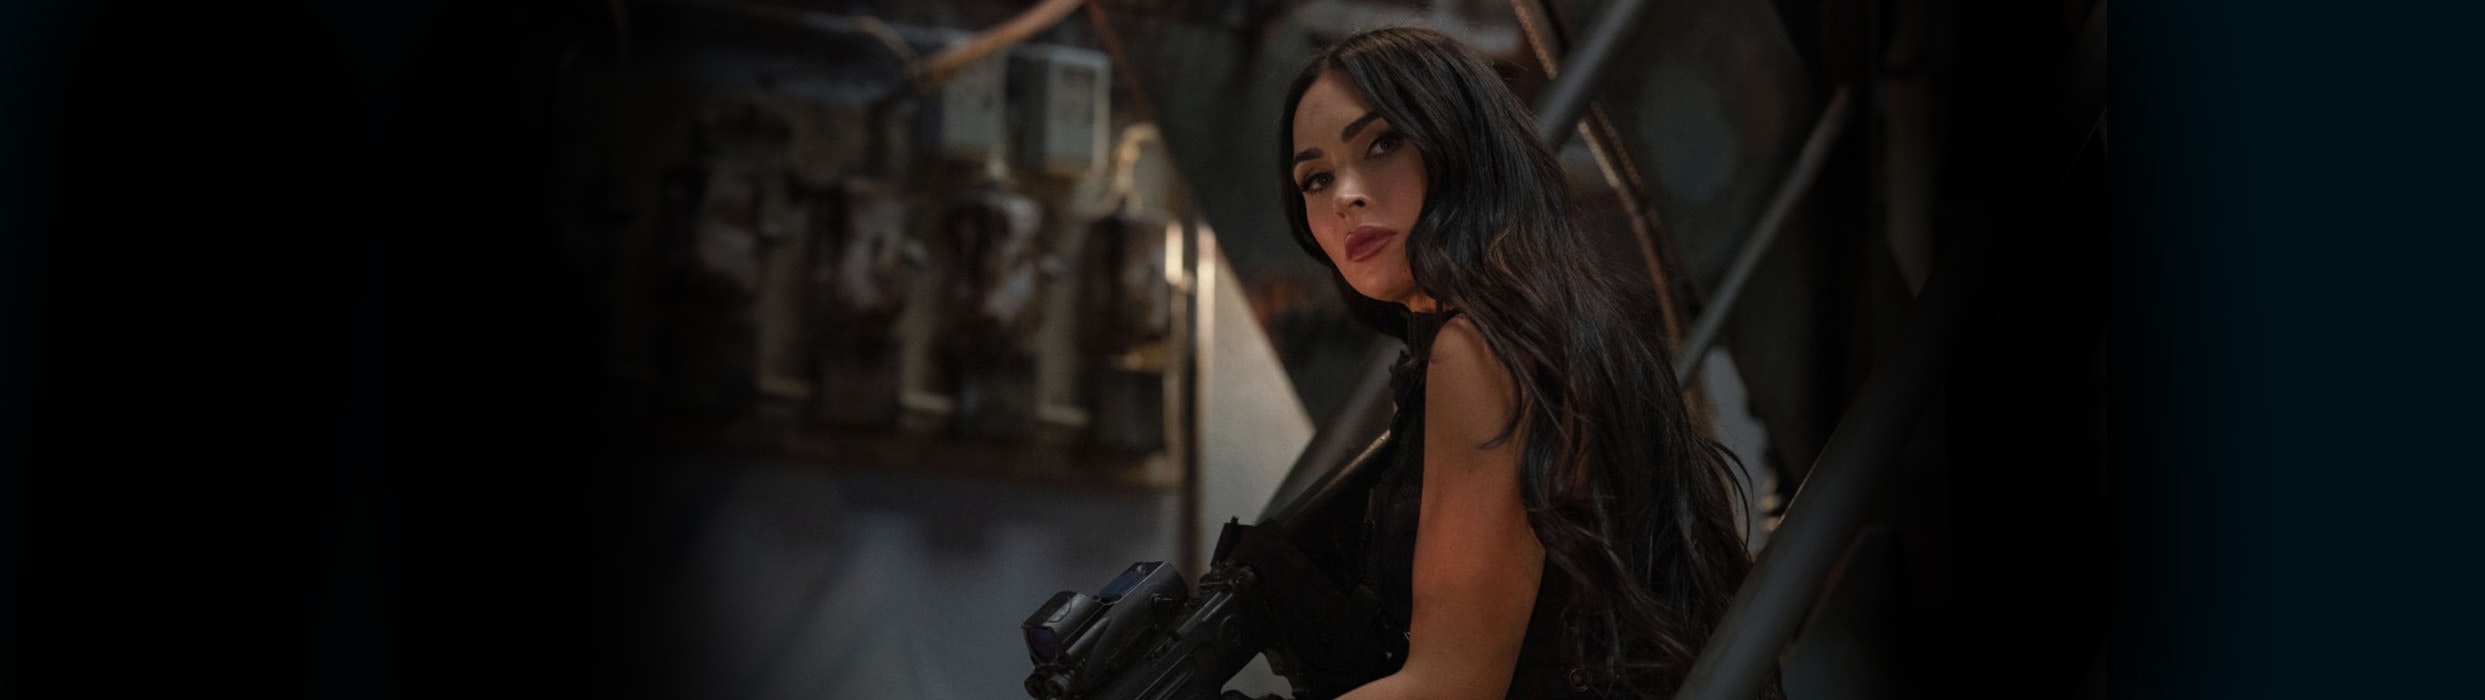 Megan Fox looks at the enemy in a stairwell with a rifle in Expend4bles now showing at Harkins! Get your tickets today!